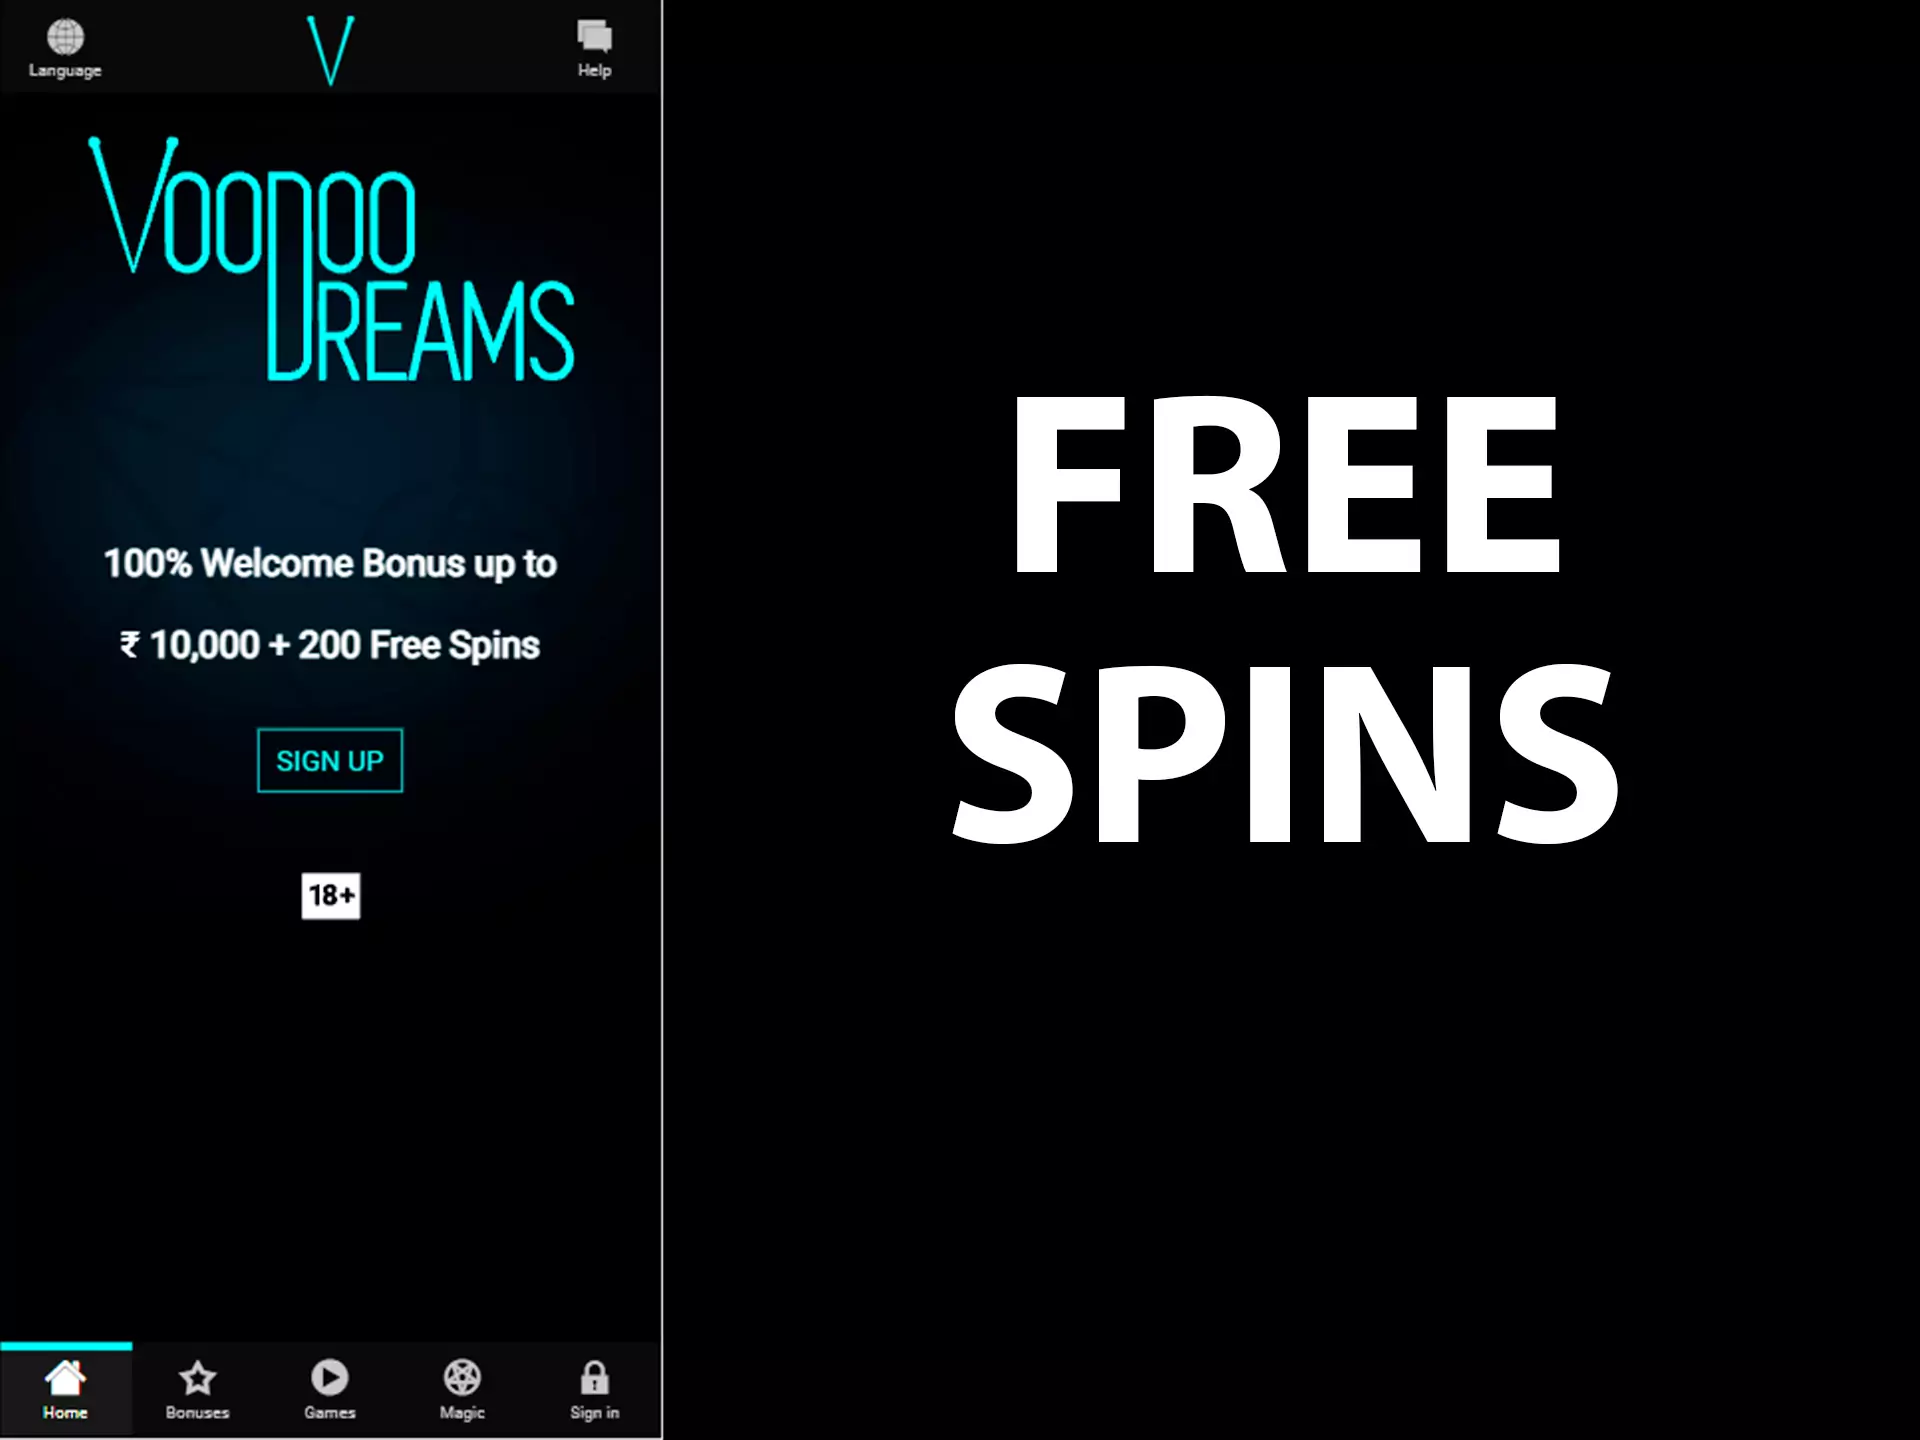 You can spend free spins to get acquainted with an online casino and its slots.